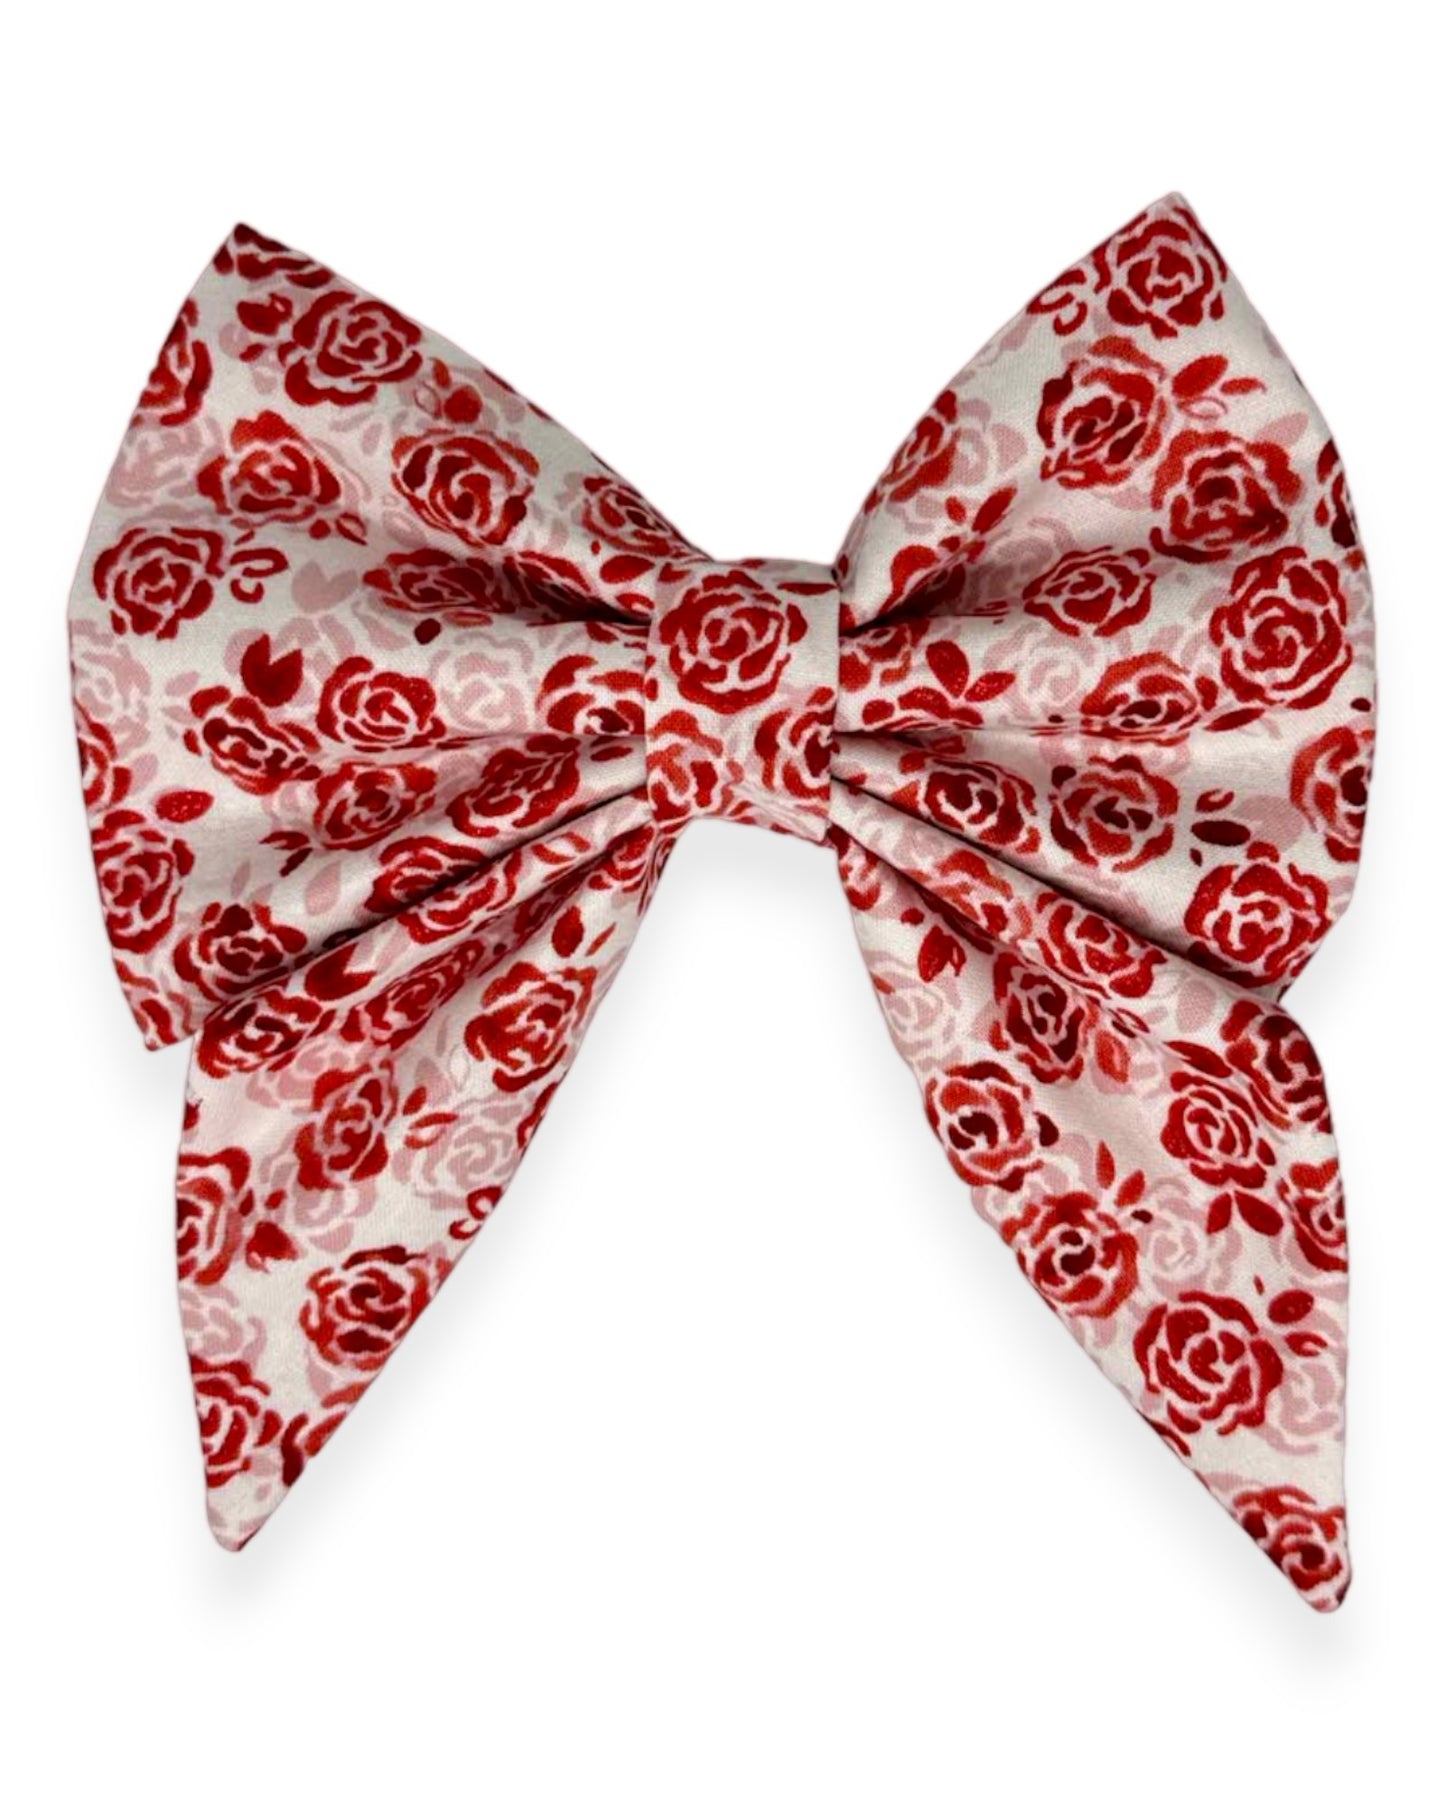 Red Rose Calico Dog Bow with Sparkles, Front